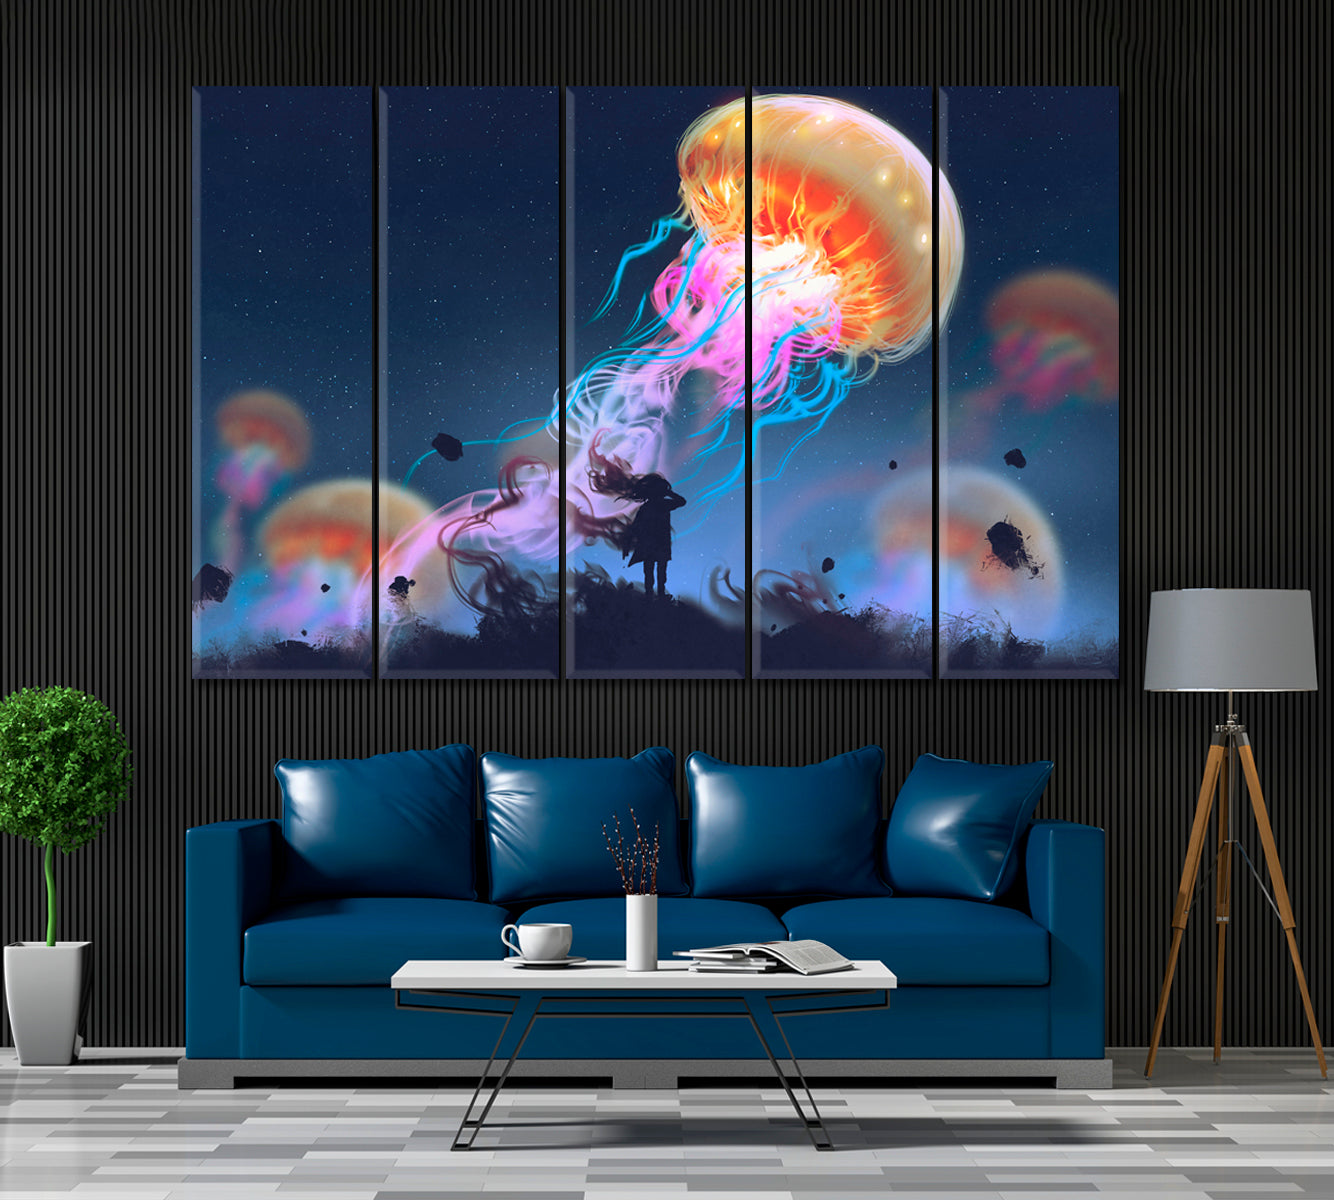 Giant Jellyfish in Sky Canvas Print ArtLexy 5 Panels 36"x24" inches 